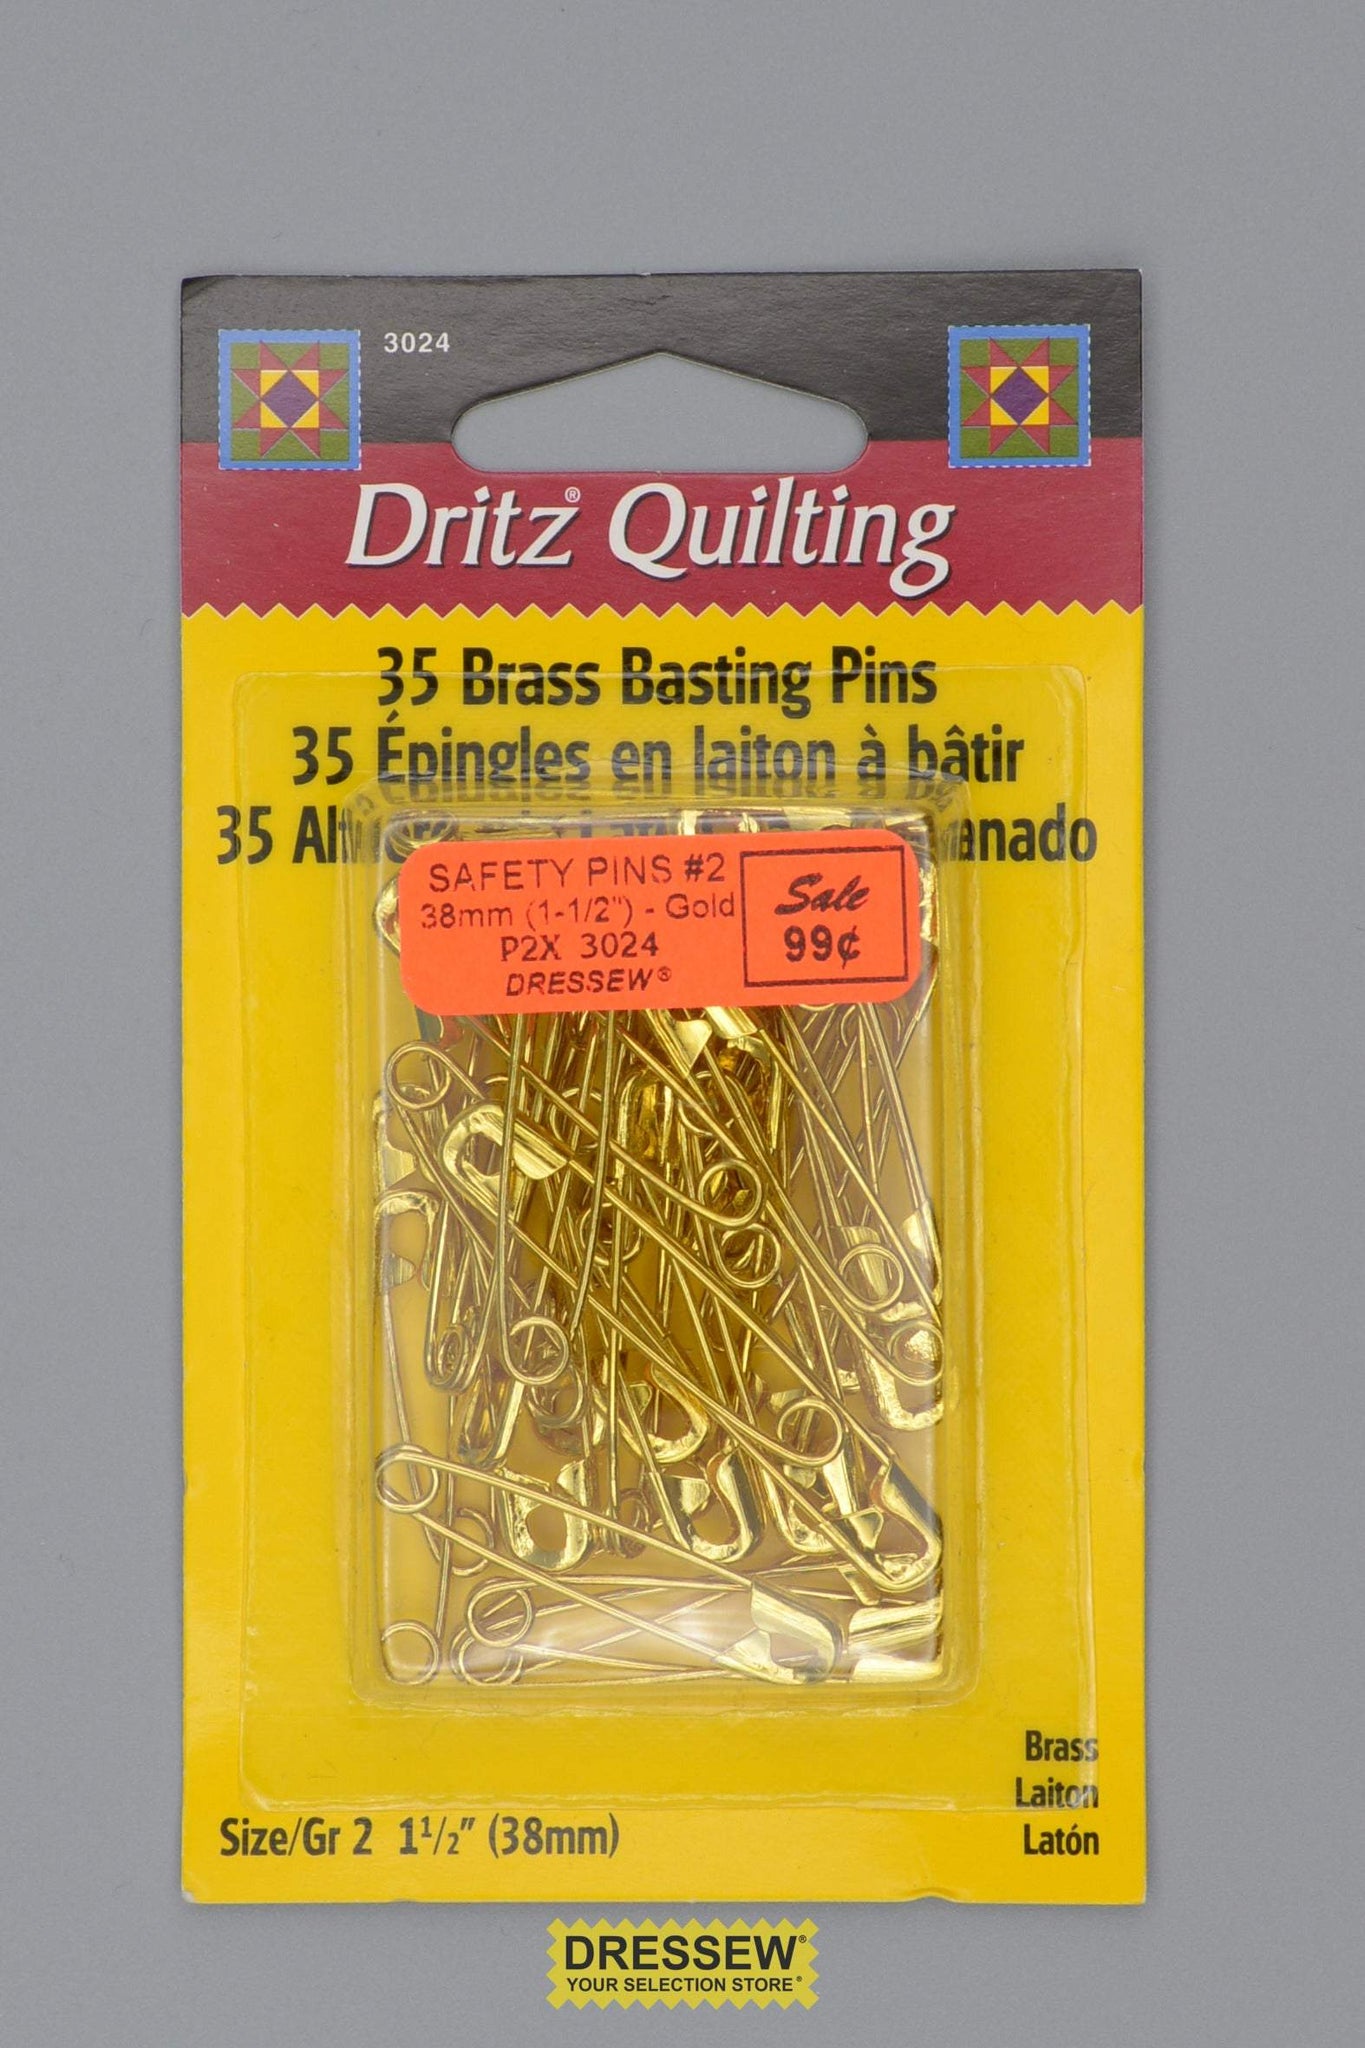 Safety Pins #2 38mm (1-1/2") Gold